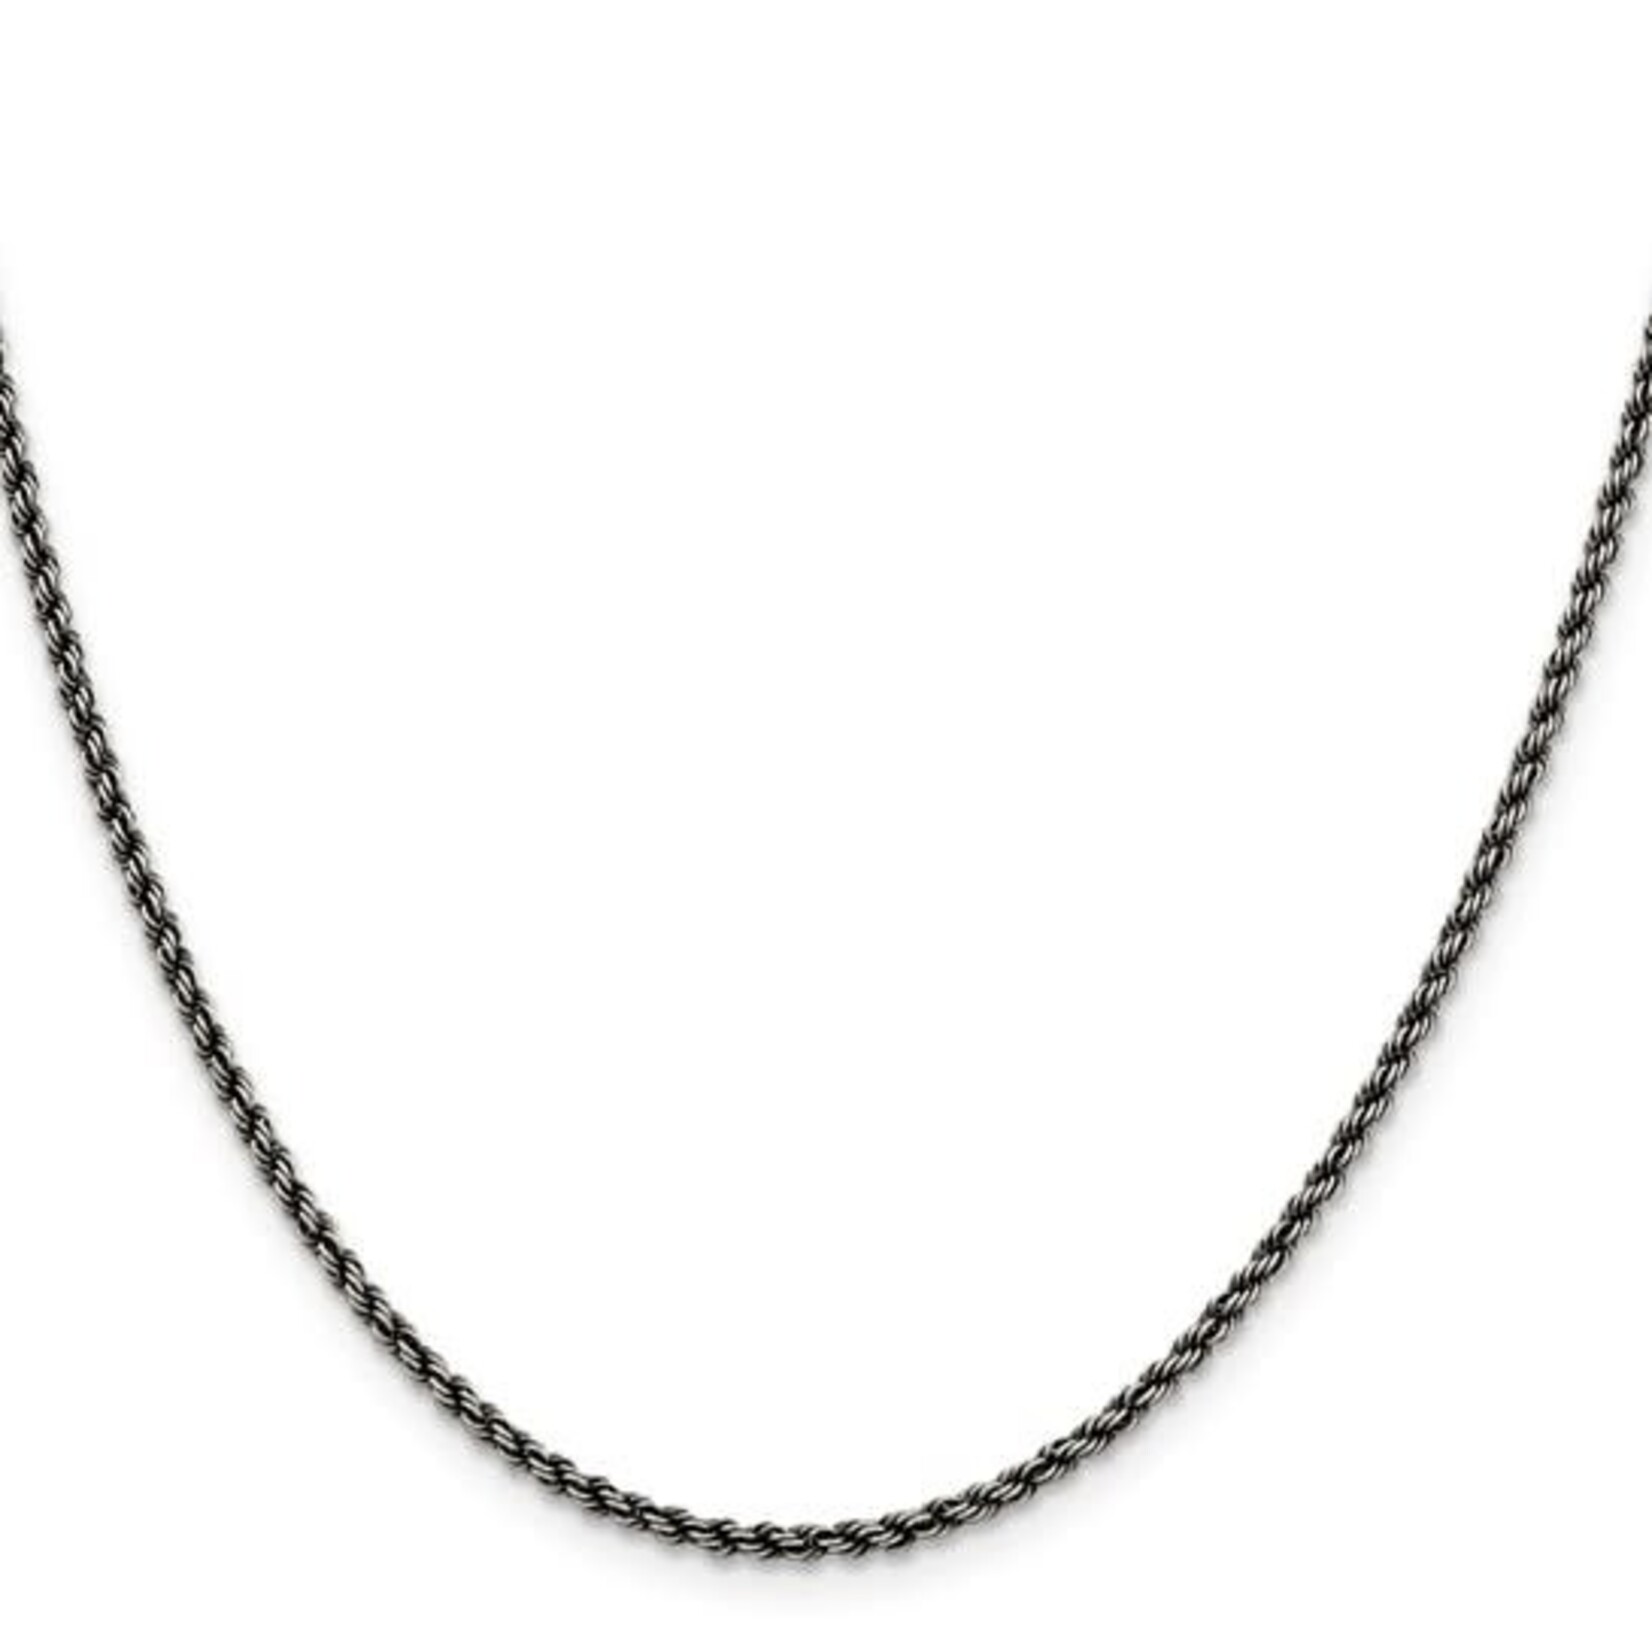 Quality Gold Sterling Silver Ruthenium 2.3mm Rope Chain 26"